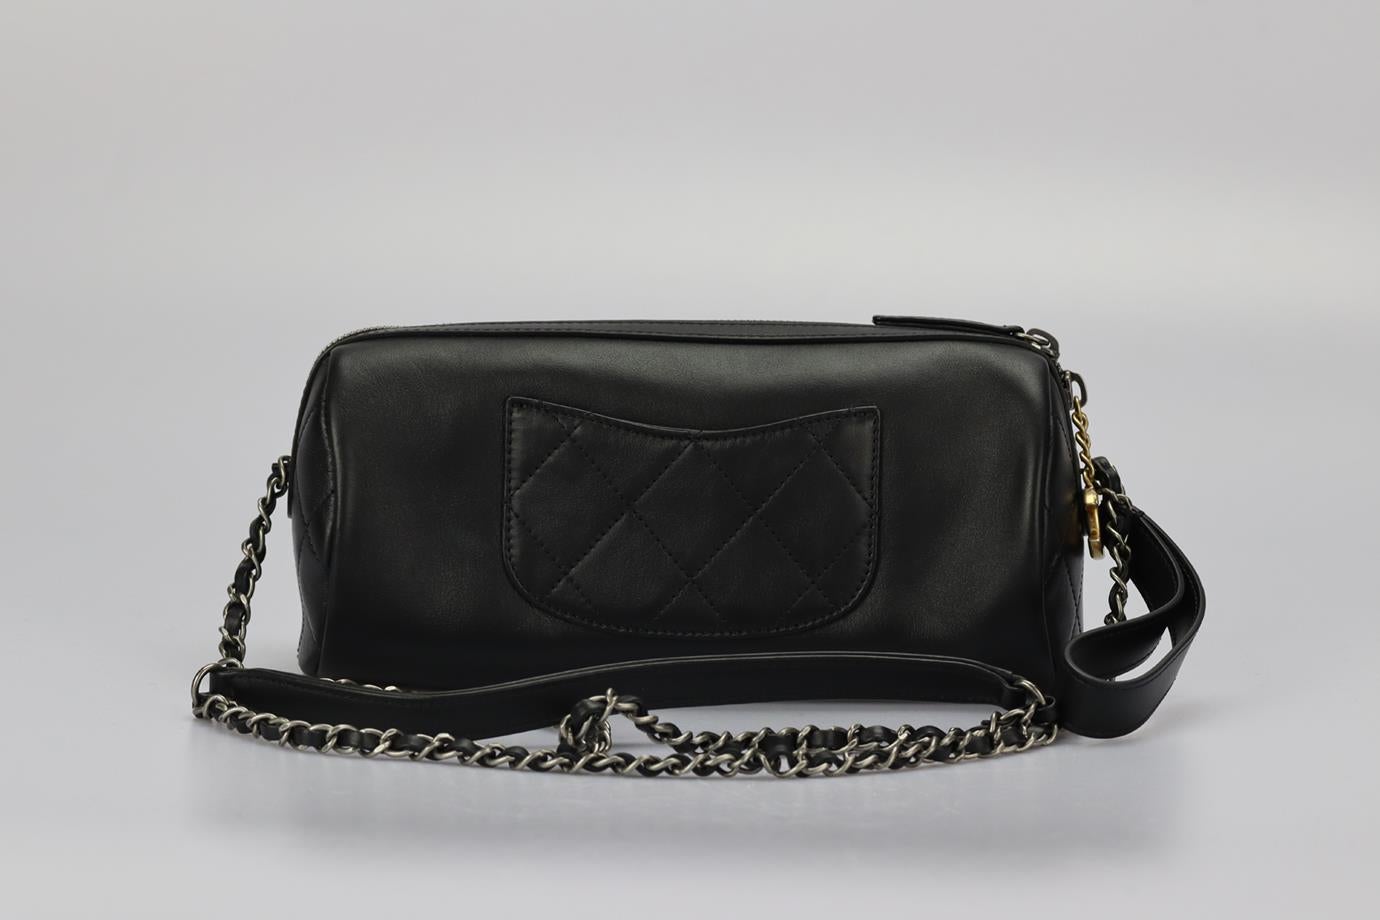 Chanel 2020 Written In Chain Bowling Leather Shoulder Bag In Excellent Condition For Sale In London, GB